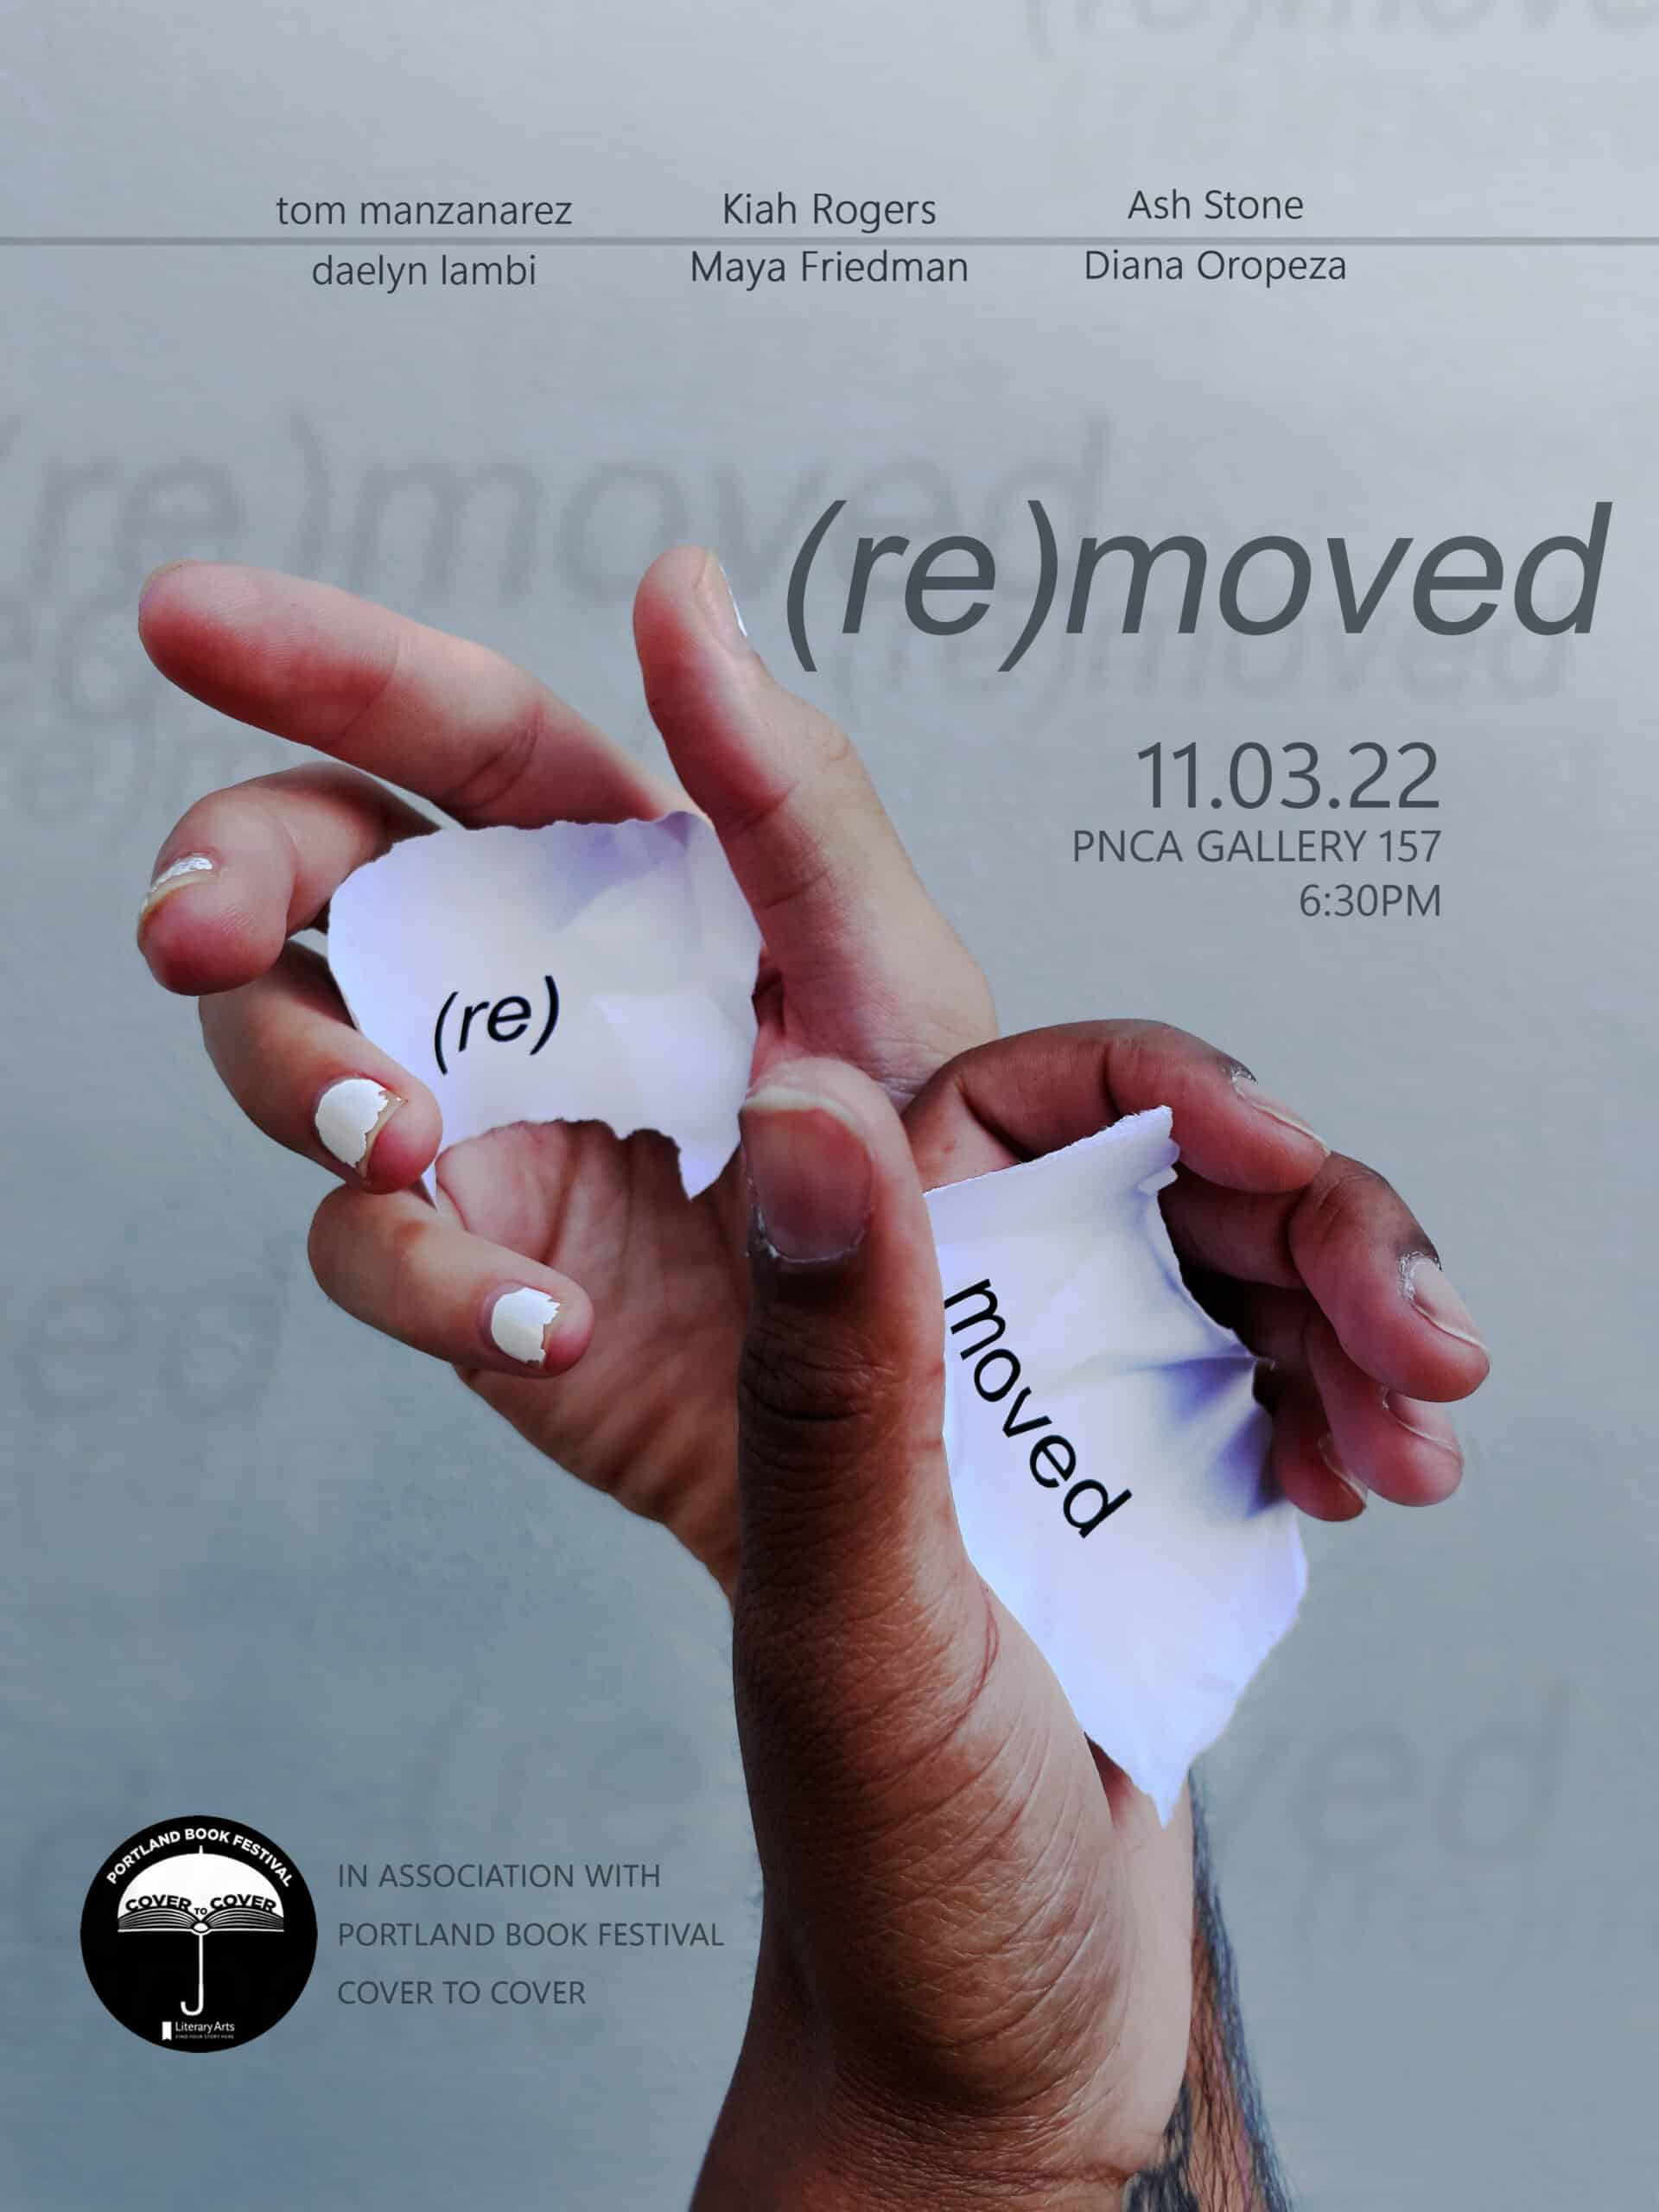 A promotional image for the event (re)moved for the Portland Book Festival Cover to Cover program. The image features a hand with two torn pieces of paper forming the word 